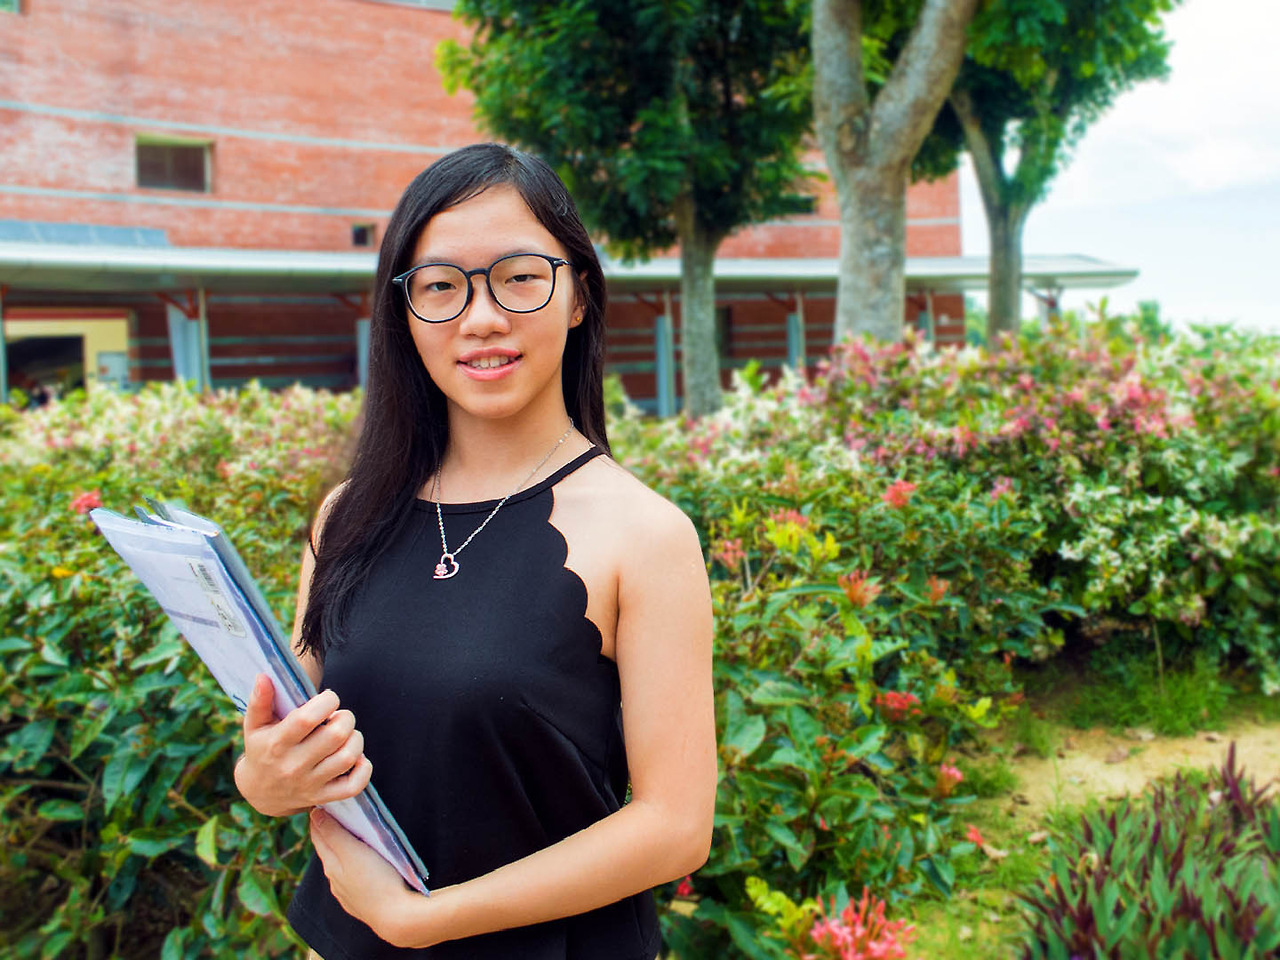 “If someone had asked me what I wanted to do when I was 16, studying business was definitely not the answer. Yet, here I am taking Bachelor of Commerce, majoring in public relations and management. Since I was a young girl, my ambition was to be a...